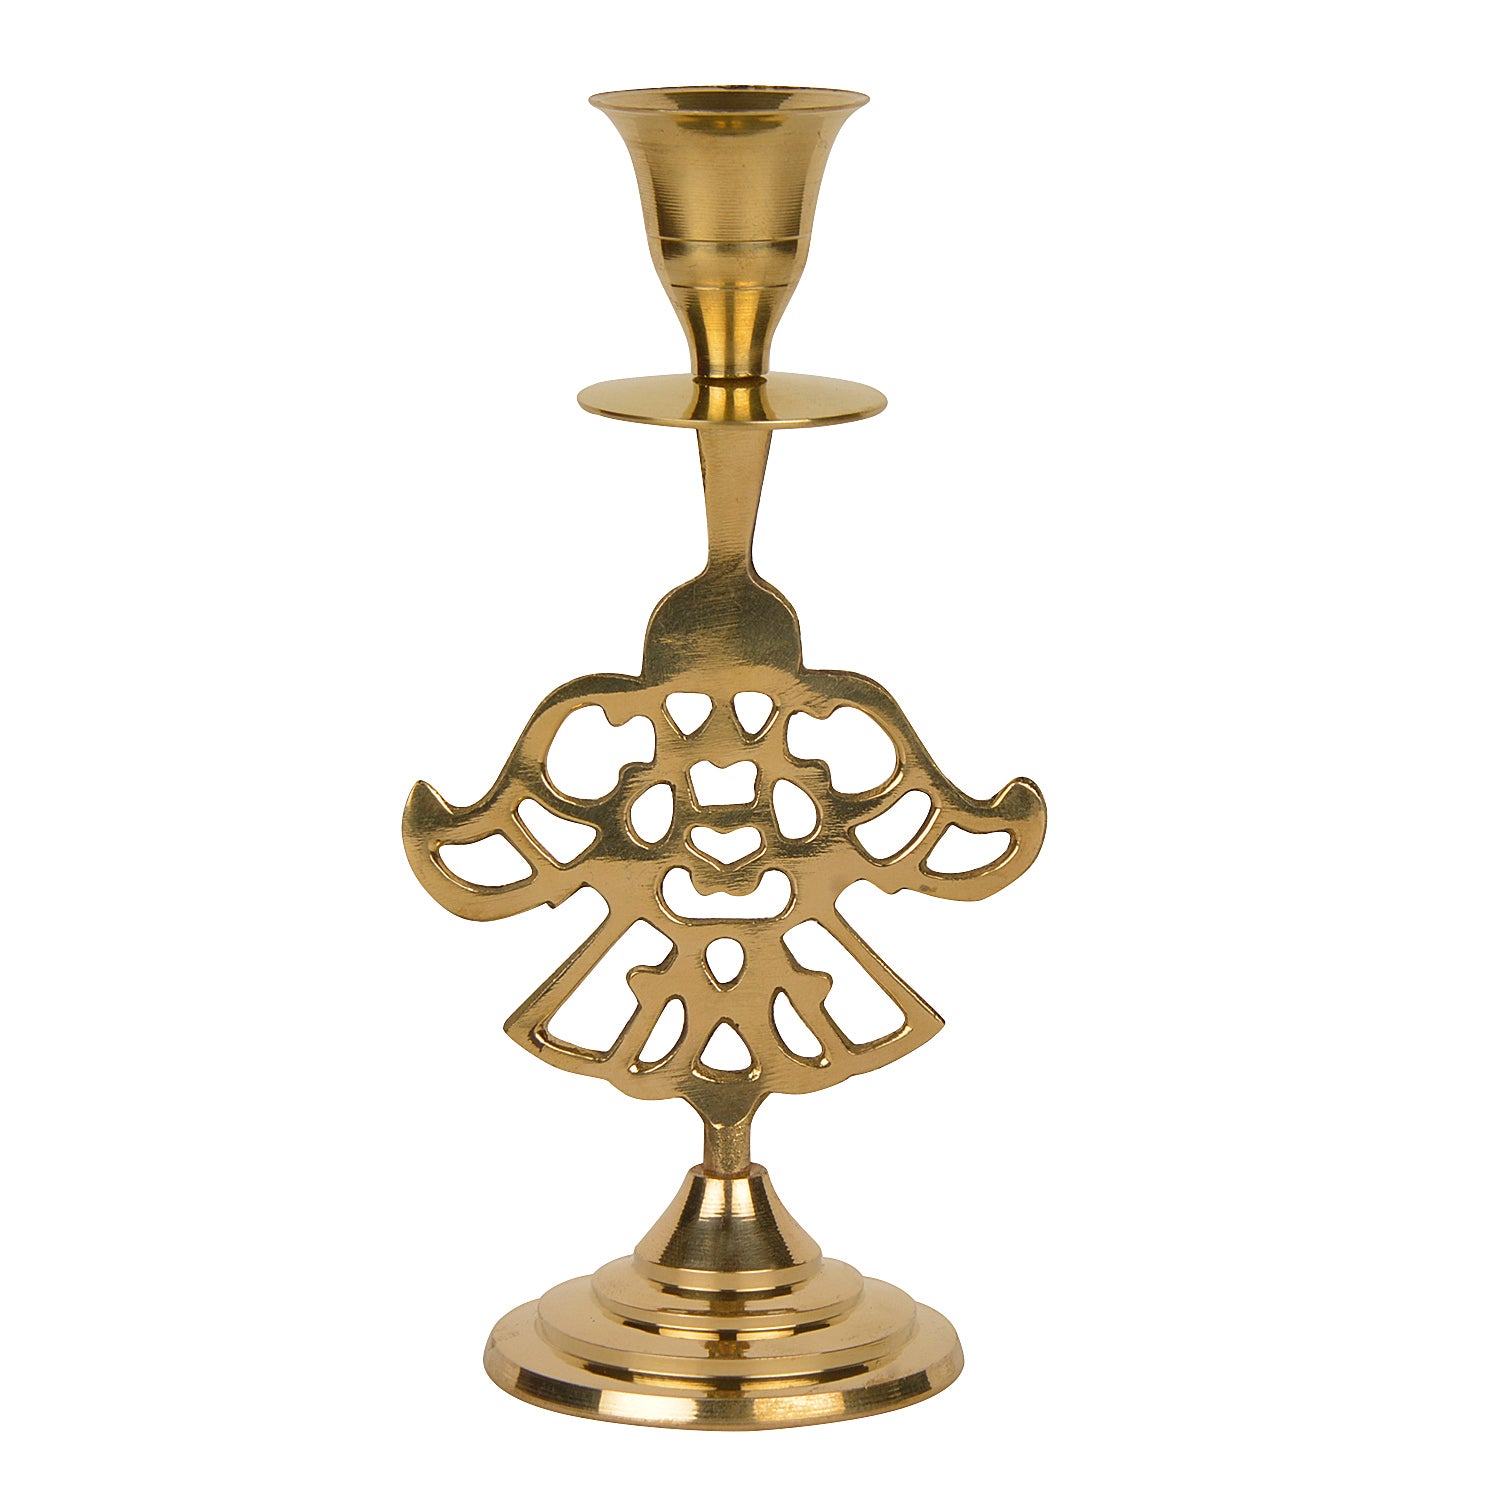  Brass Candle Holder
